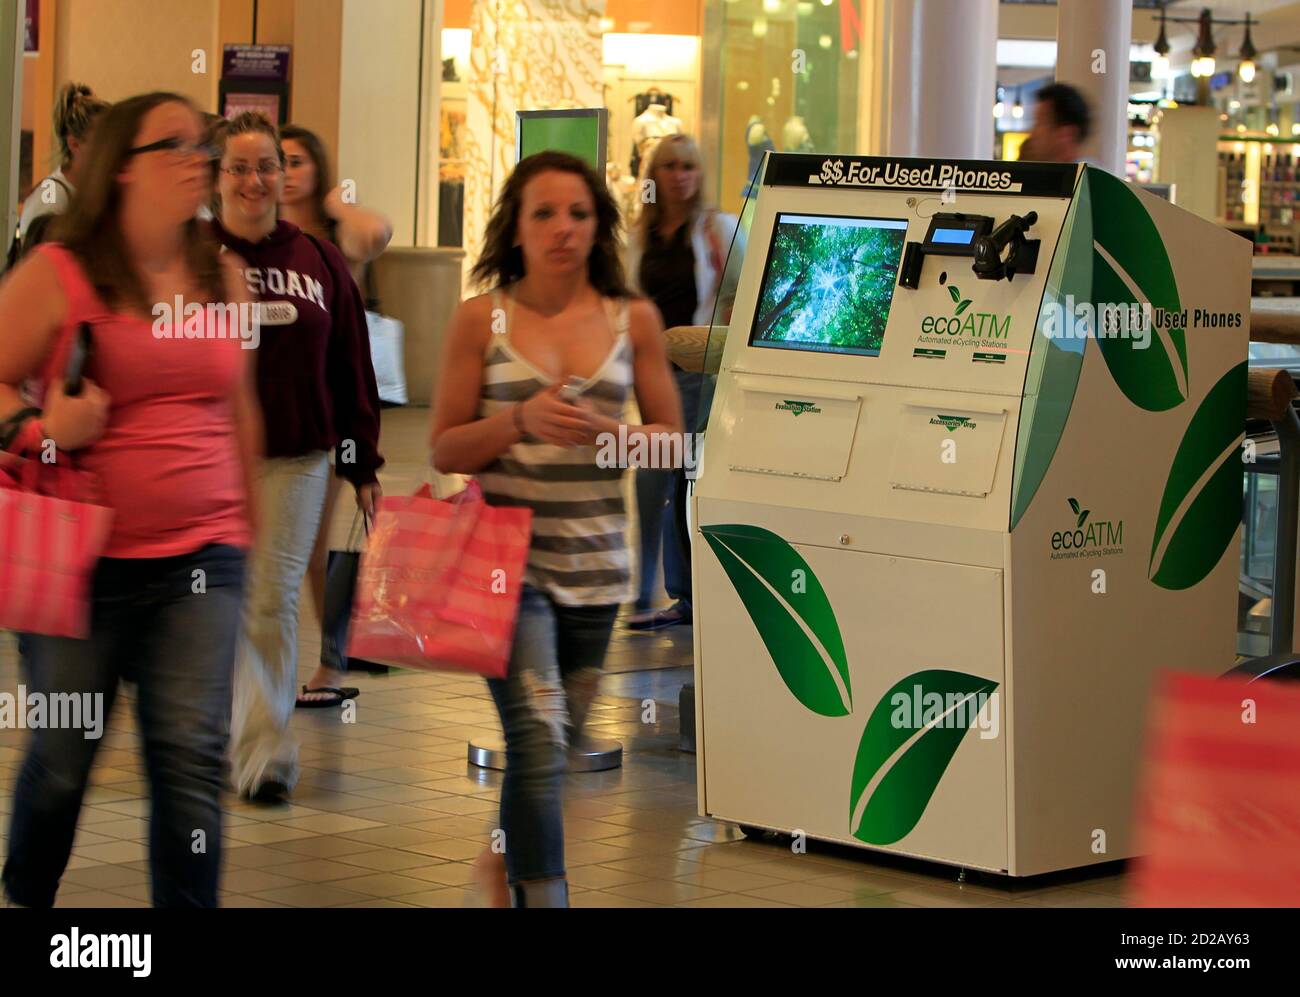 Shoppers walk past an ECO ATM machine at a shopping mall in Rancho Bernado, California April 20, 2010. A small start-up company from San Diego is building ATM type kiosks that can scan and price old used cellphones and then pay the customer on the spot for the device. Picture taken April 20, 2010.   REUTERS/Mike Blake  (UNITED STATES - Tags: ENVIRONMENT SOCIETY SCI TECH BUSINESS) Stock Photo